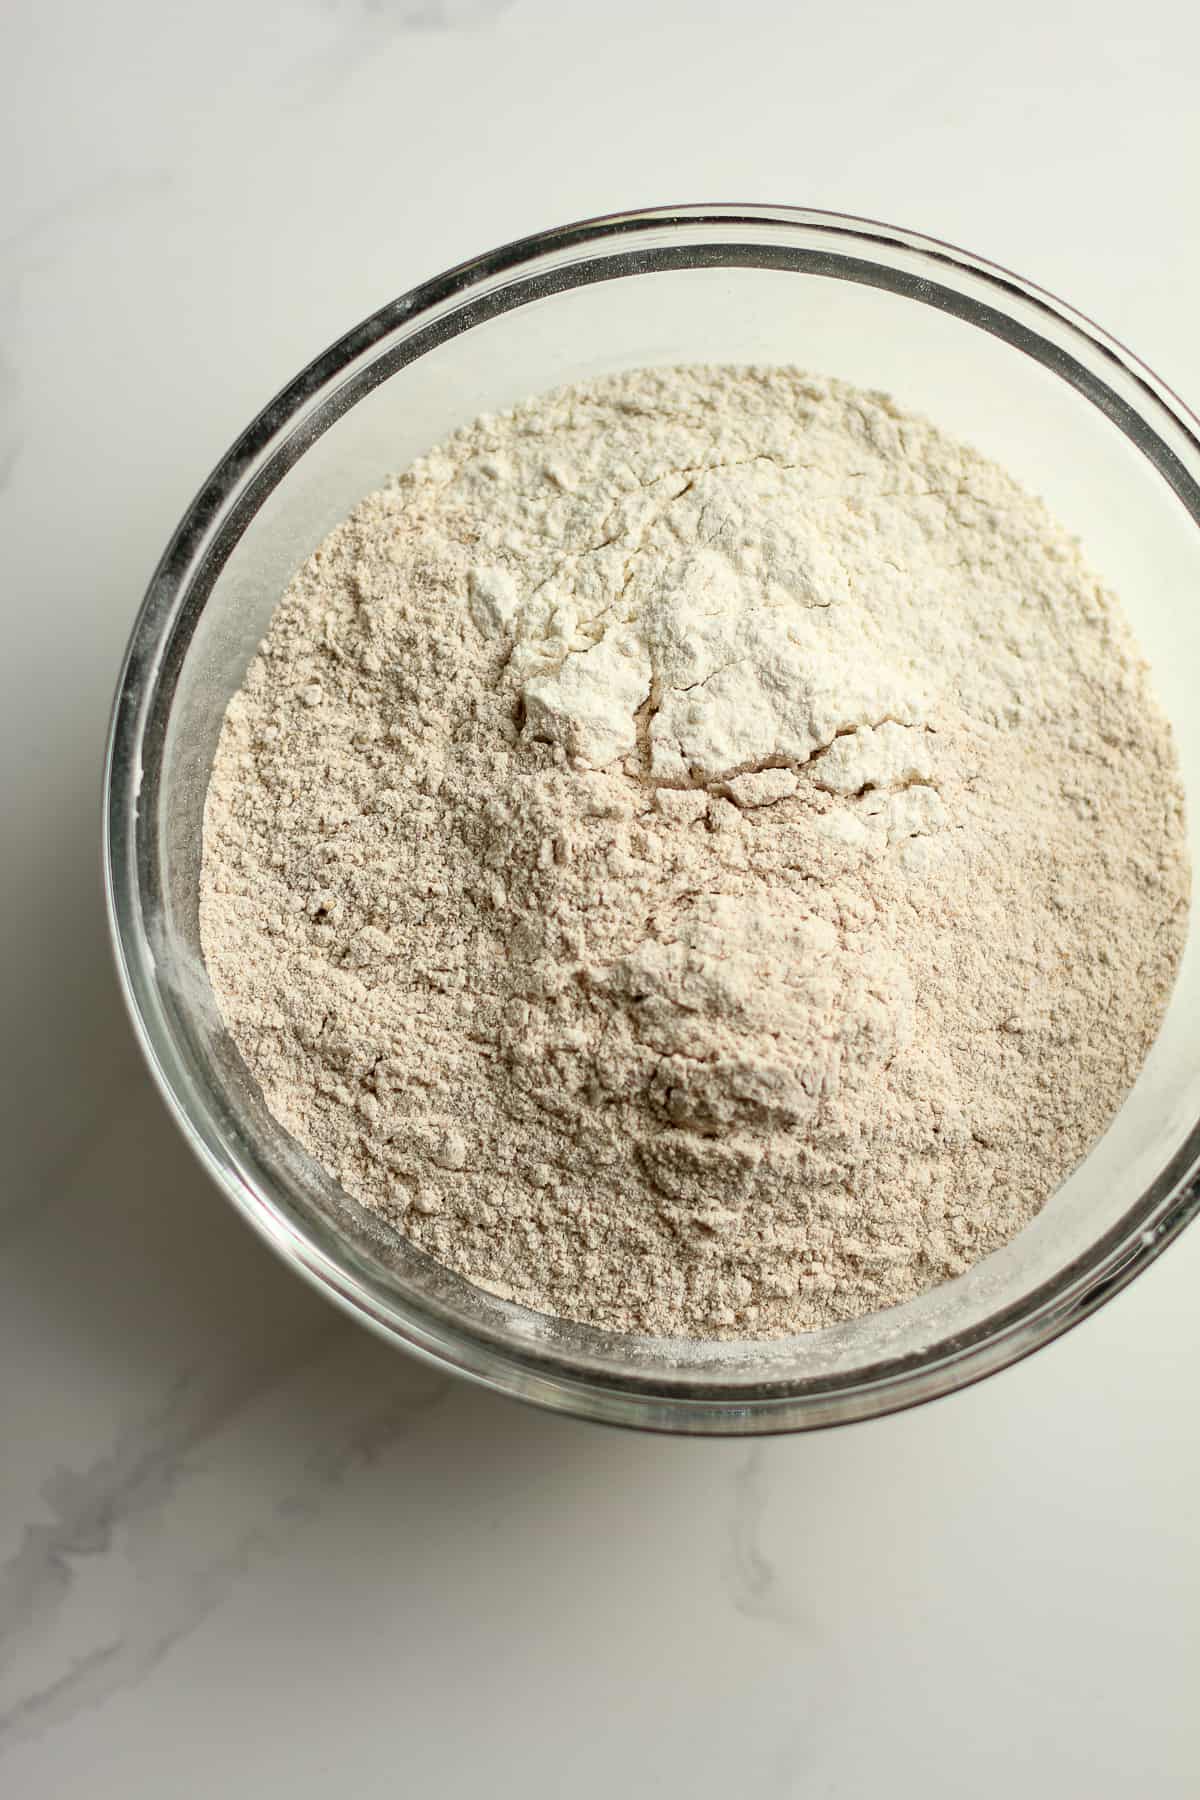 The flour in a bowl.